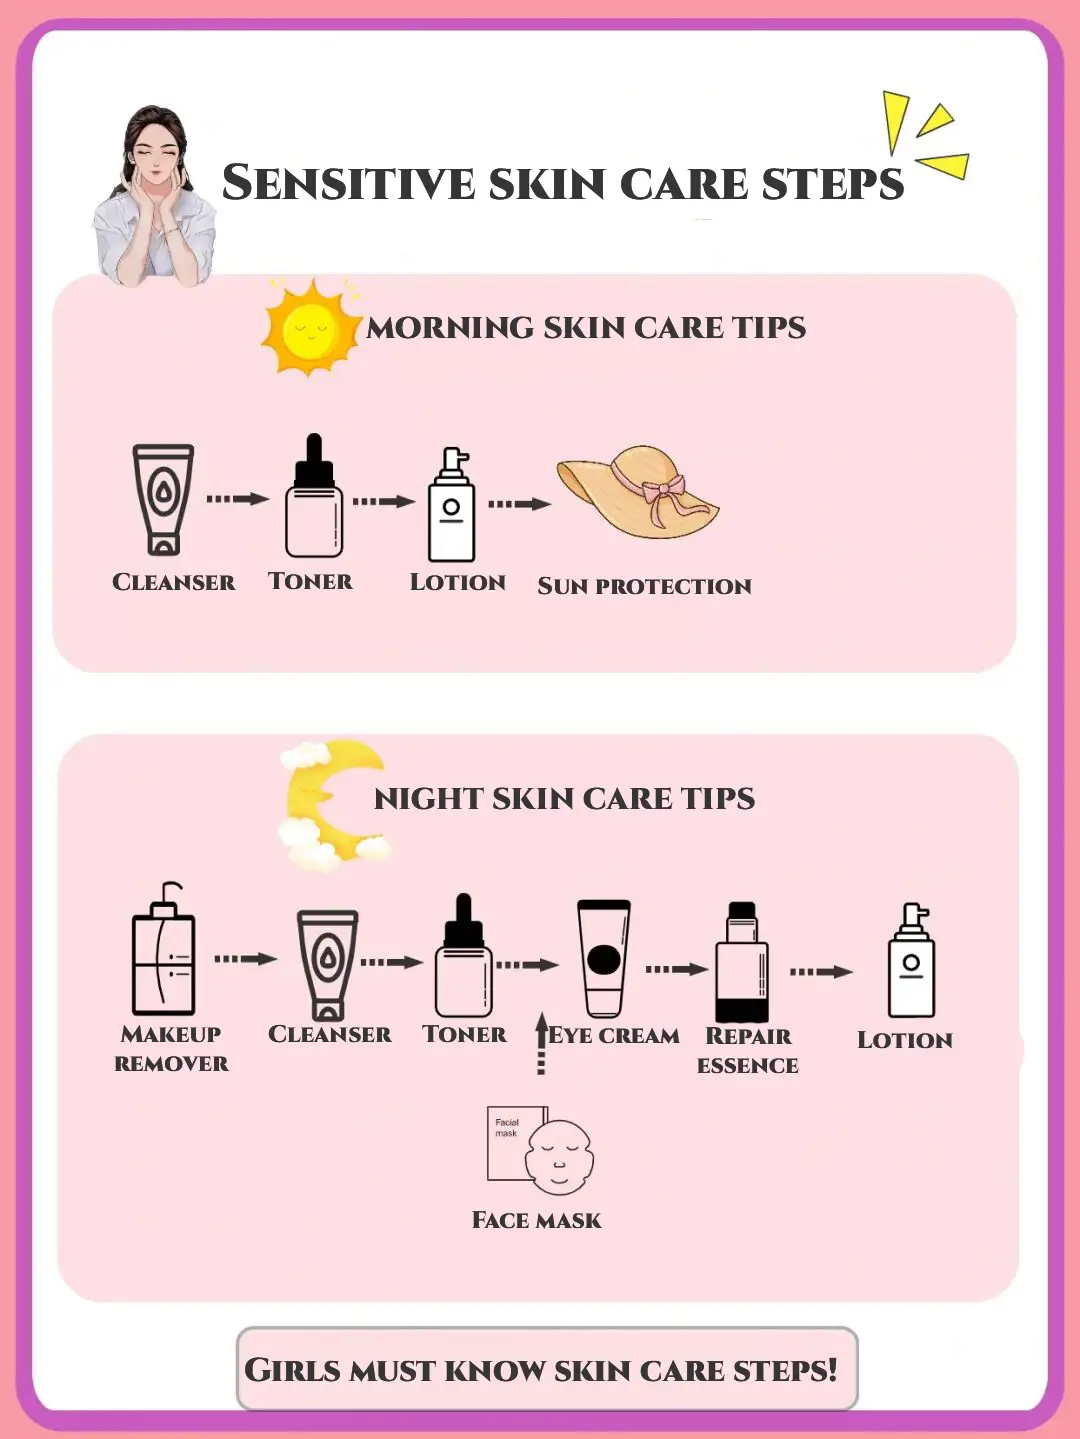 Skin care tips and sequence for various skin types's images(1)